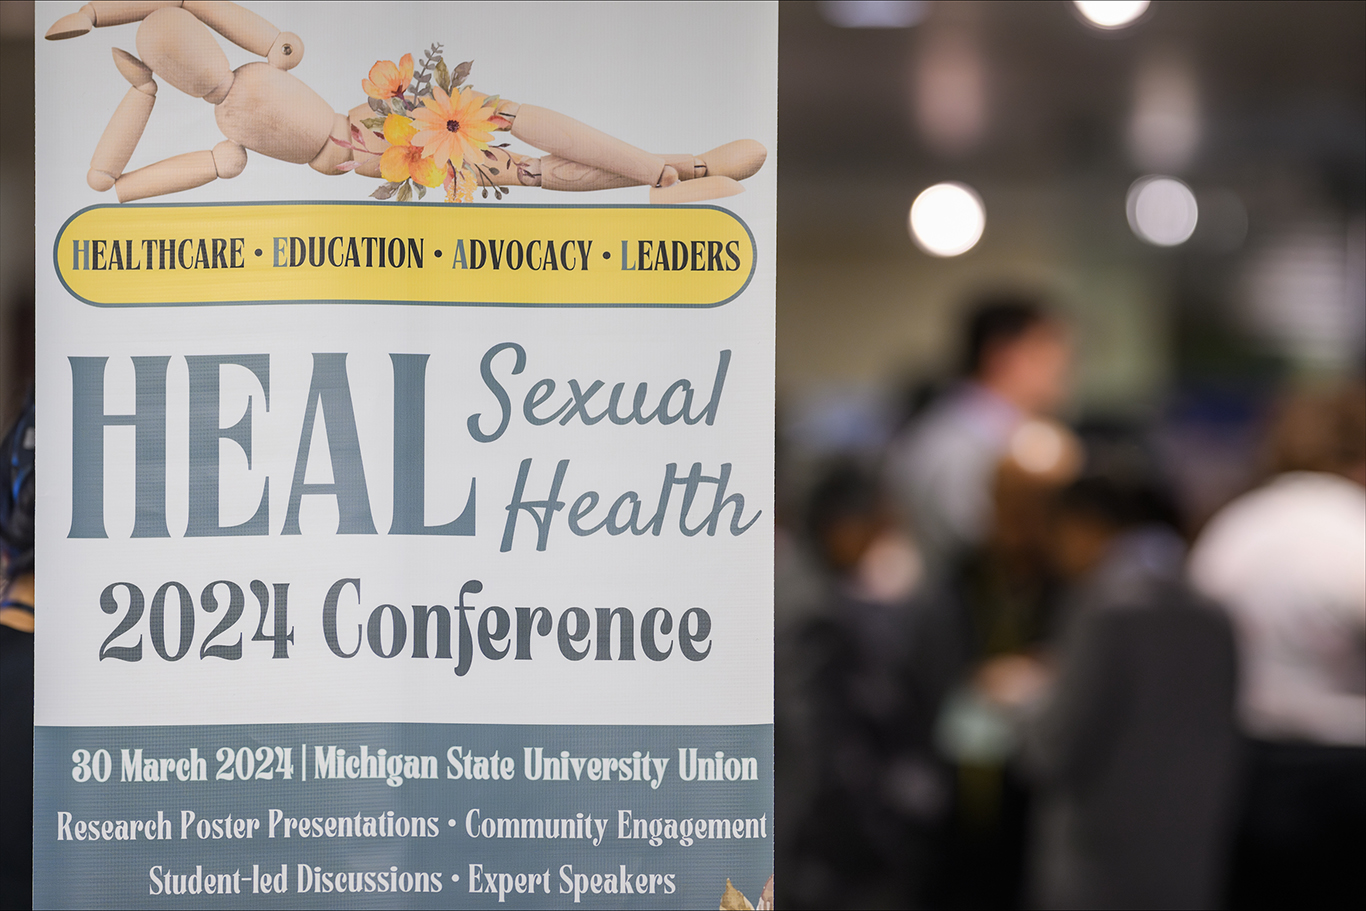 HEAL Conference welcome sign